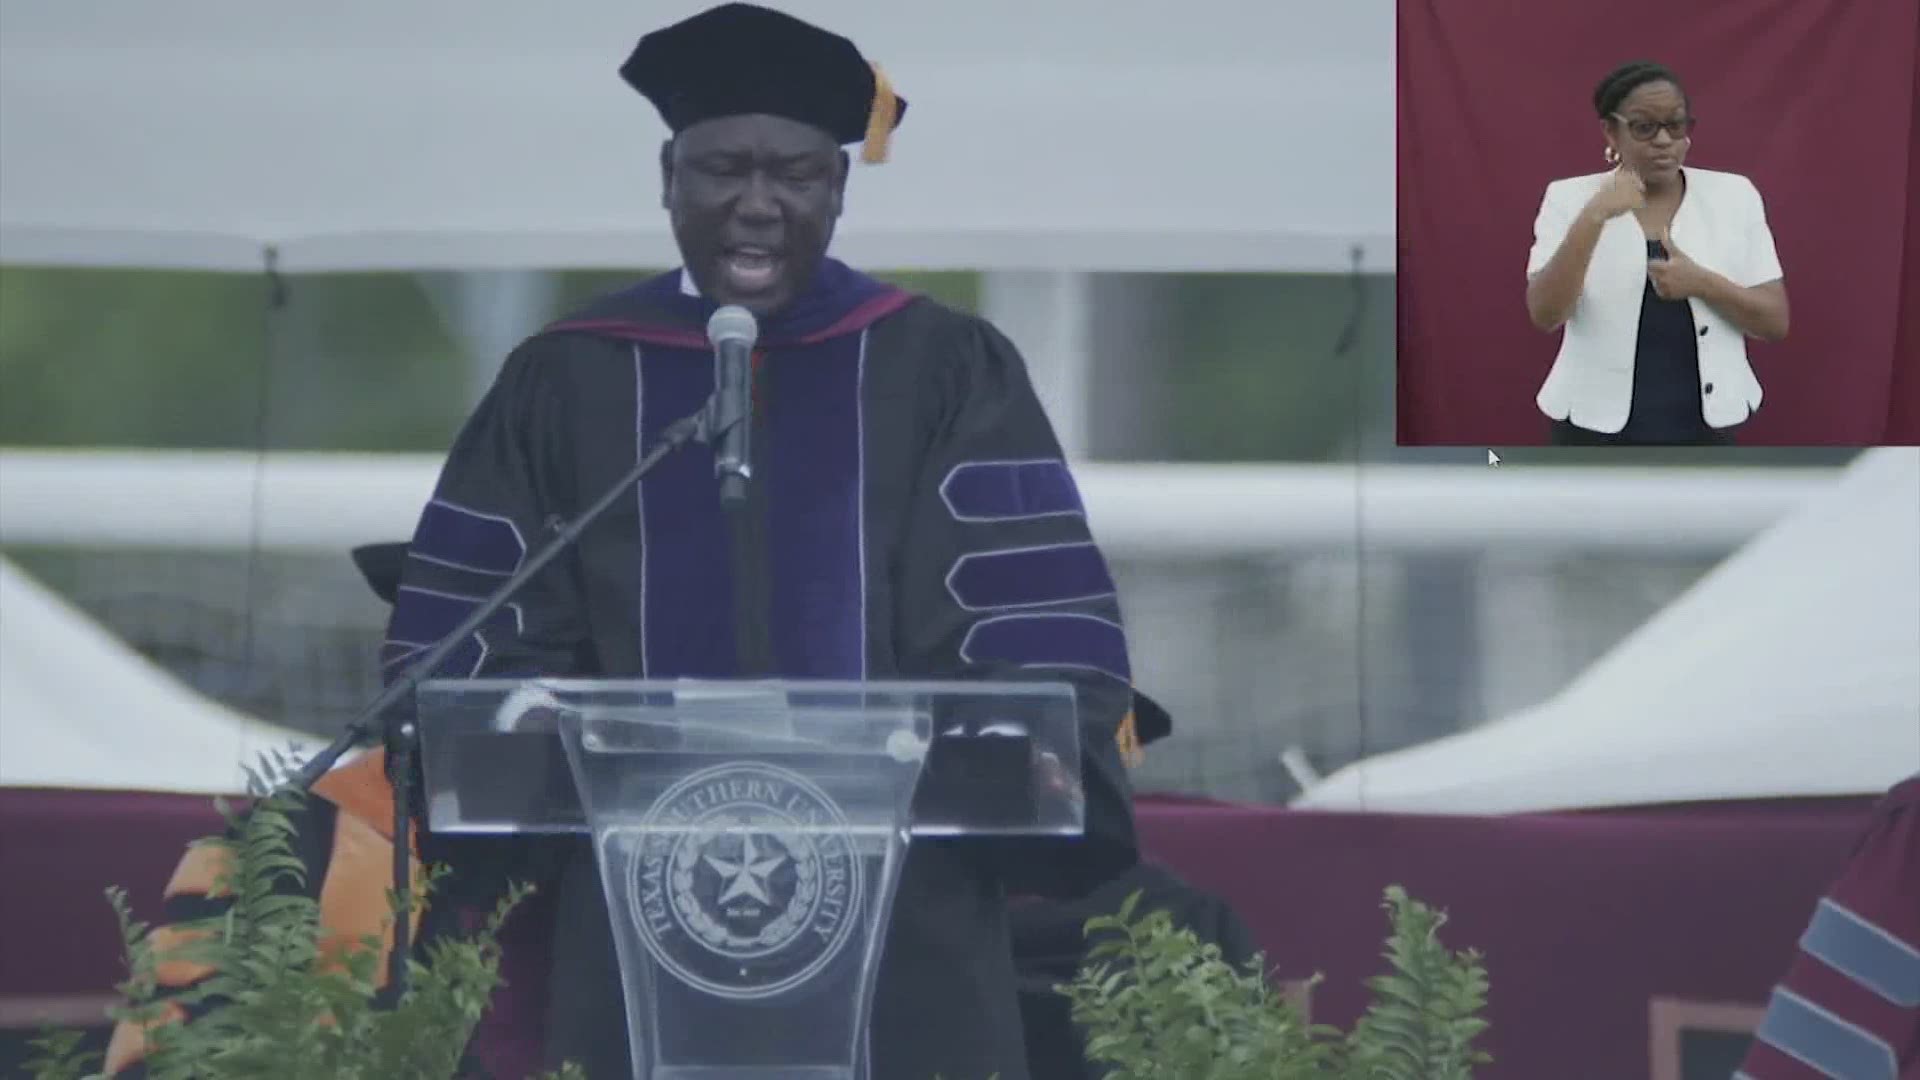 It was graduation day at TSU, with civil rights attorney Ben Crump addressing students.